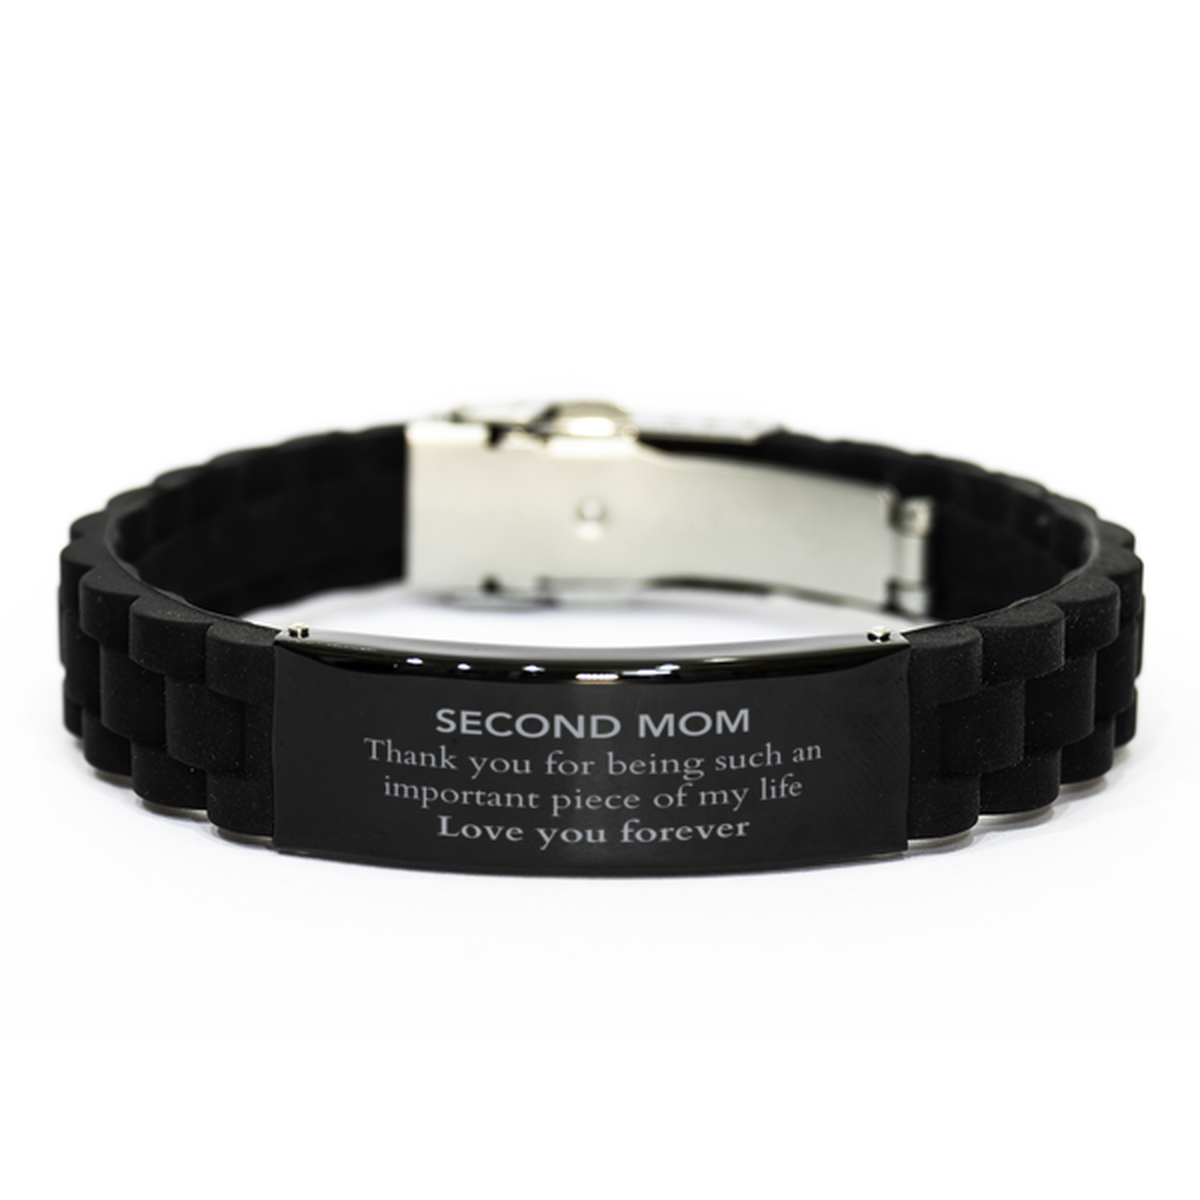 Appropriate Second Mom Black Glidelock Clasp Bracelet Epic Birthday Gifts for Second Mom Thank you for being such an important piece of my life Second Mom Christmas Mothers Fathers Day